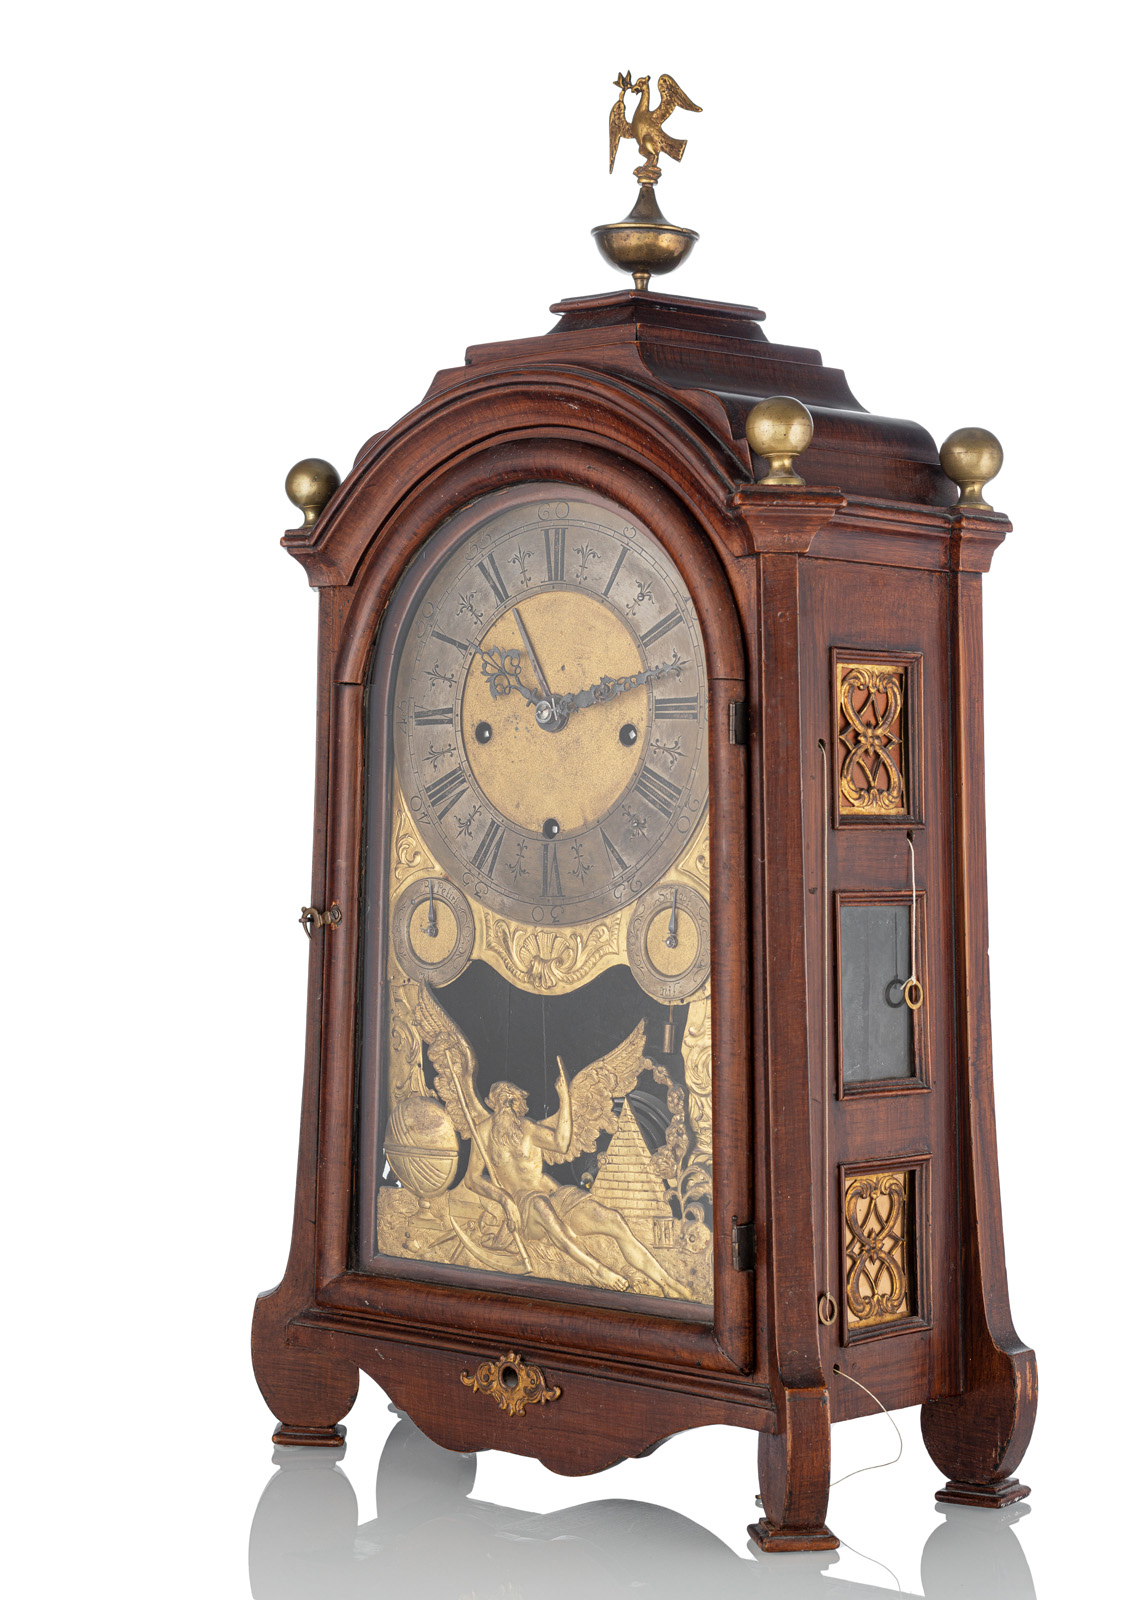 A SOUTH GERMAN BRASS MOUNTED GRAINED WOOD AND DISPLAY "STUTZUHR" CLOCK - Image 2 of 4